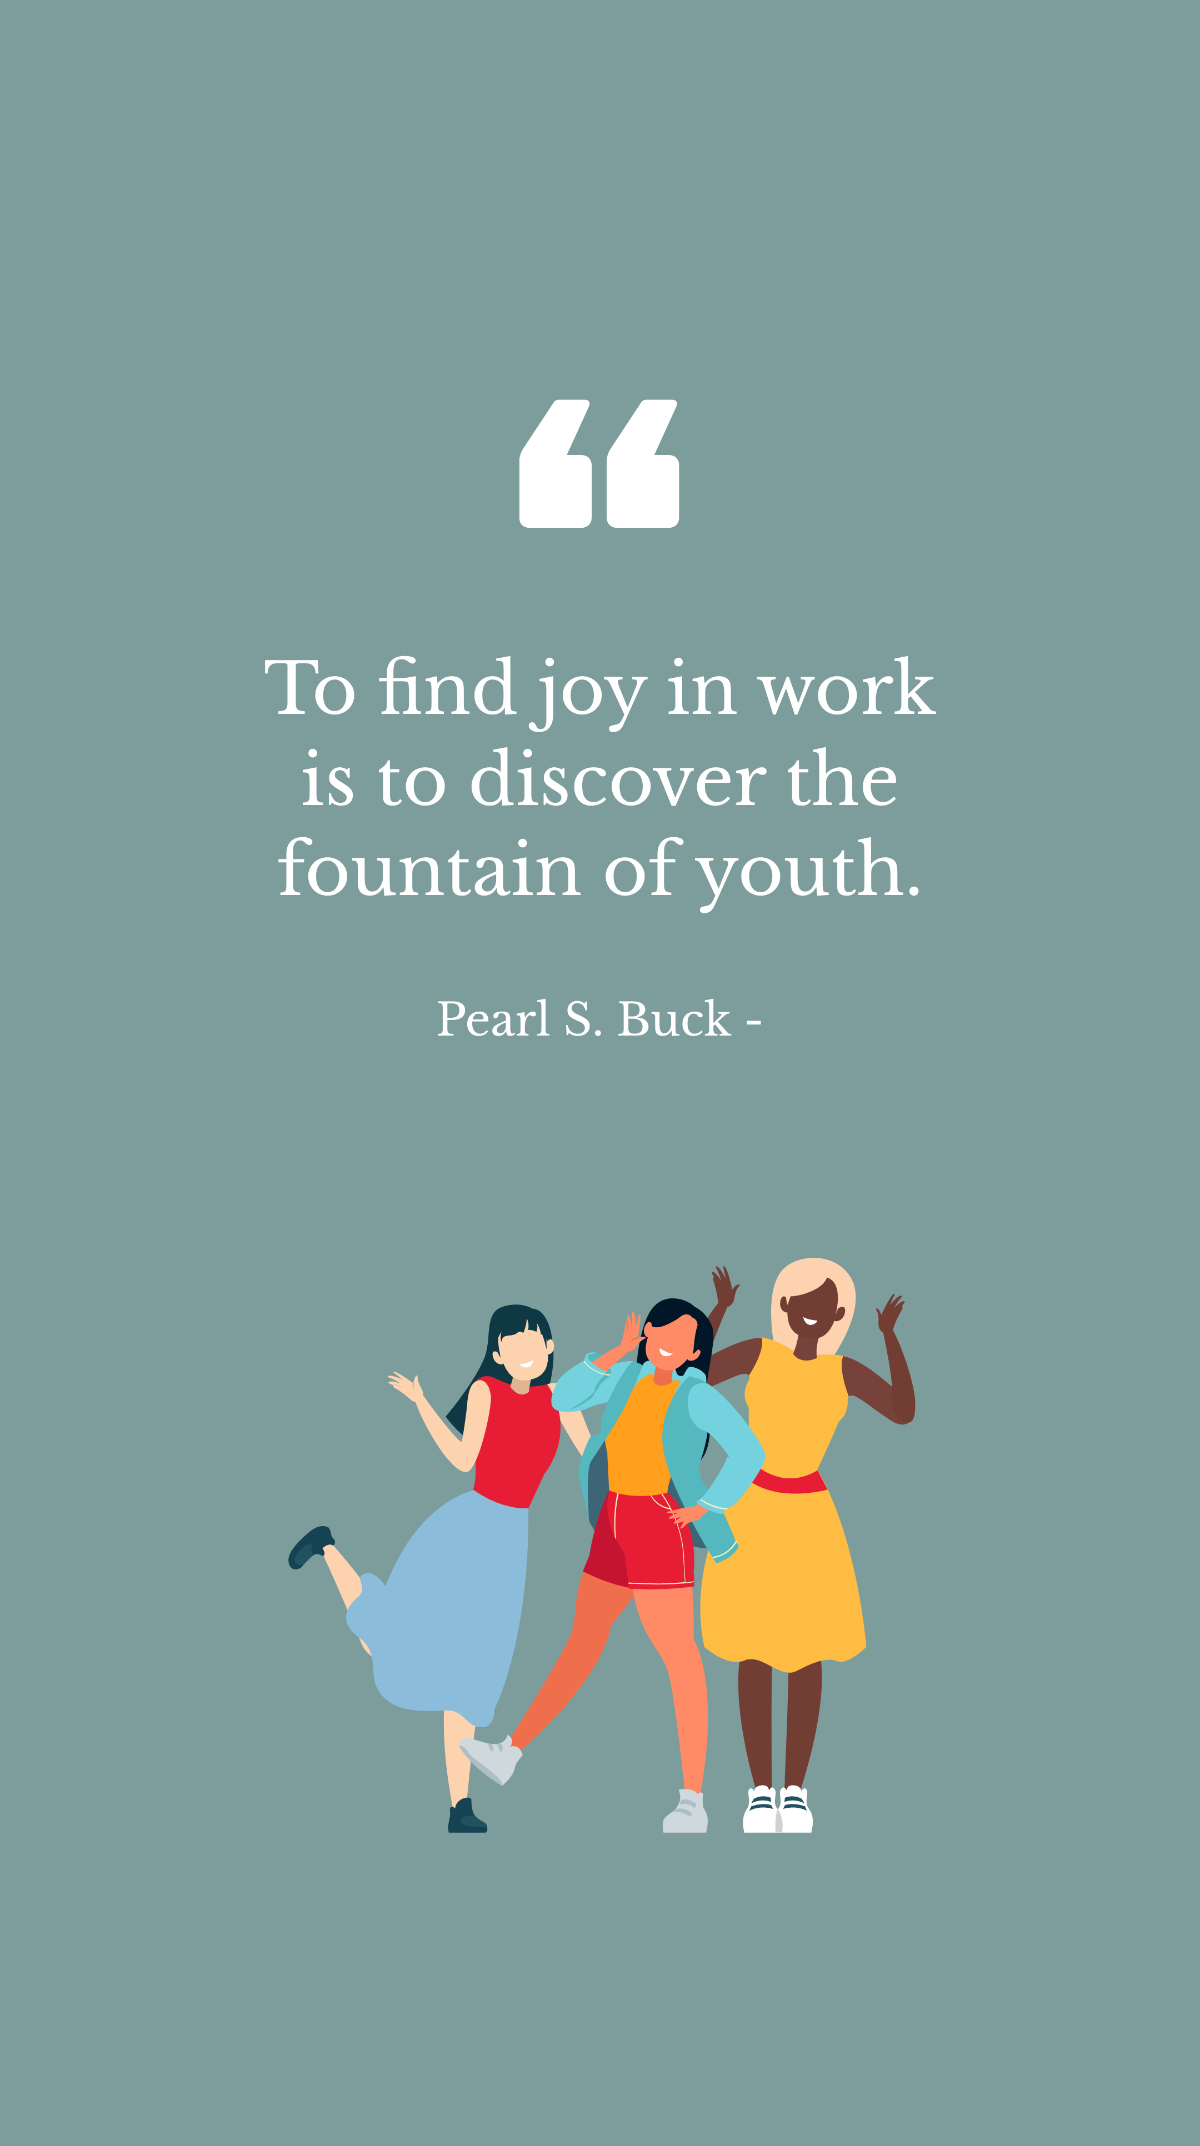 Free Pearl S. Buck - To find joy in work is to discover the fountain of youth. Template